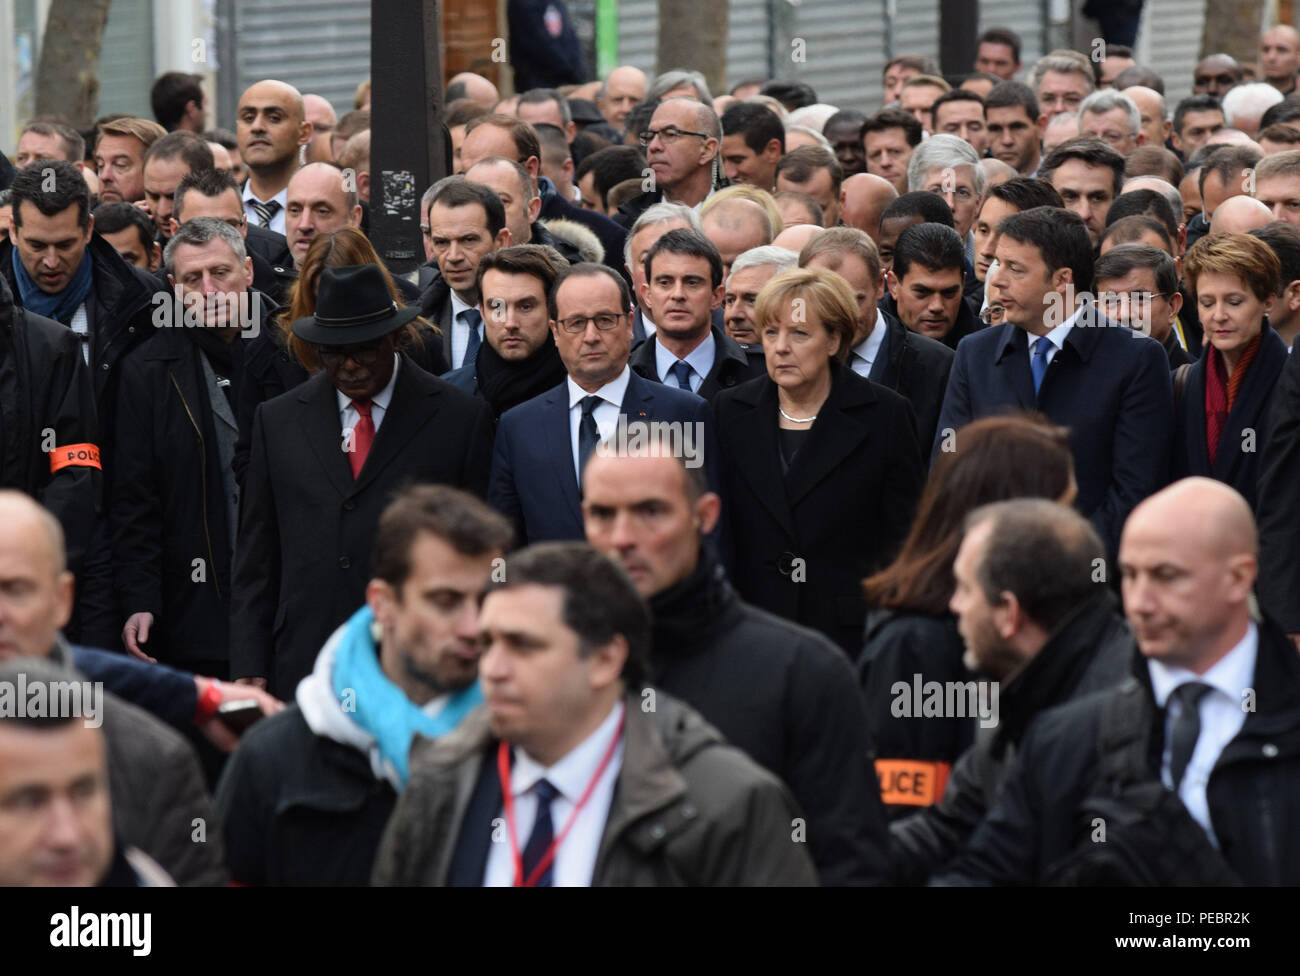 January 11, 2015 - Paris, France:  (L-R) Malian president Ibrahim Boubacar Keita, French President Francois Hollande, German chancellor Angela Merkel, Italian Prime minister Matteo Renzi take part in a march to support Freedom of expression and protest against terrorism in the French capital after three days of terror left 17 people dead. Four million people demonstrated across the country in a 'Marche Republicaine' (Republican March) celebrating the nation's unity in face of terrorist threats. La grande marche republicaine en hommage aux victimes de l'attentat contre Charlie Hebdo a rassemble Stock Photo